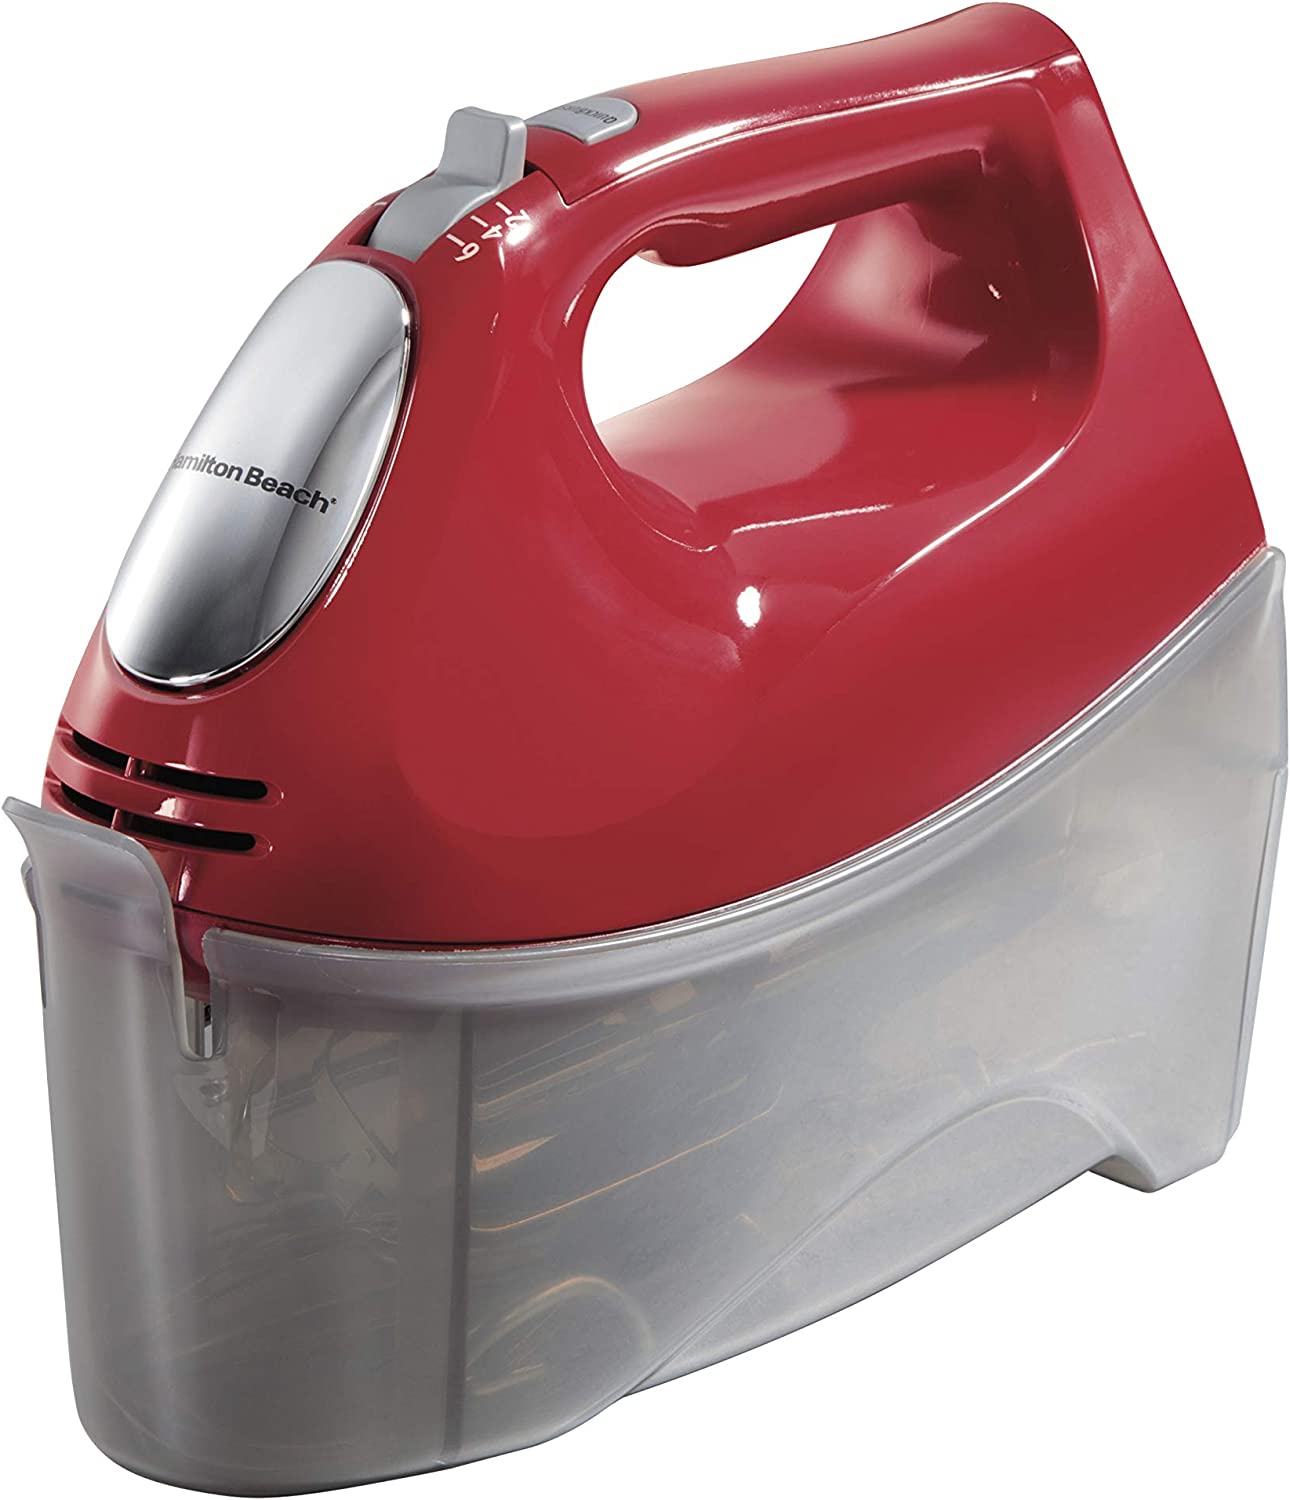  9. Hamilton Beach 6-Speed Electric Hand Mixer with 5 attachments 